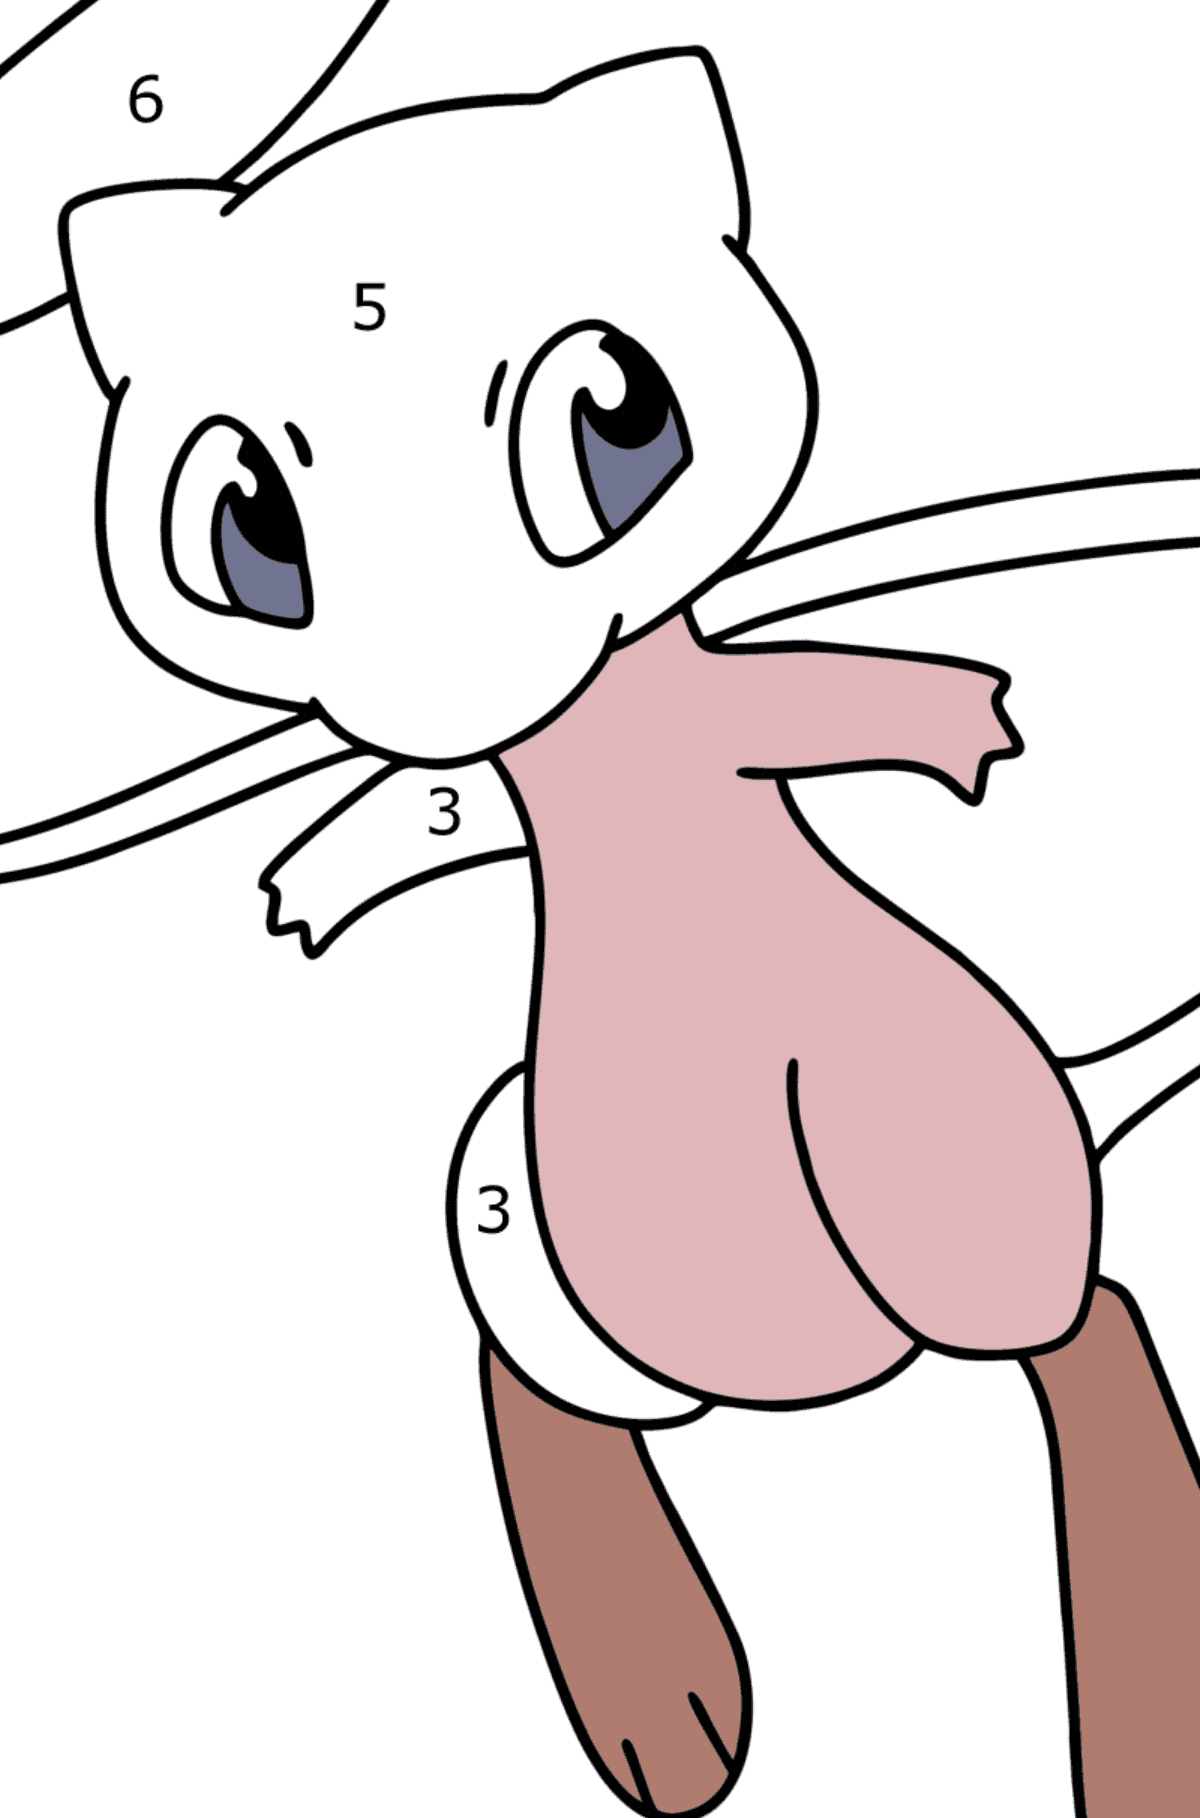 Coloring page Pokemon Go Mew - Coloring by Numbers for Kids